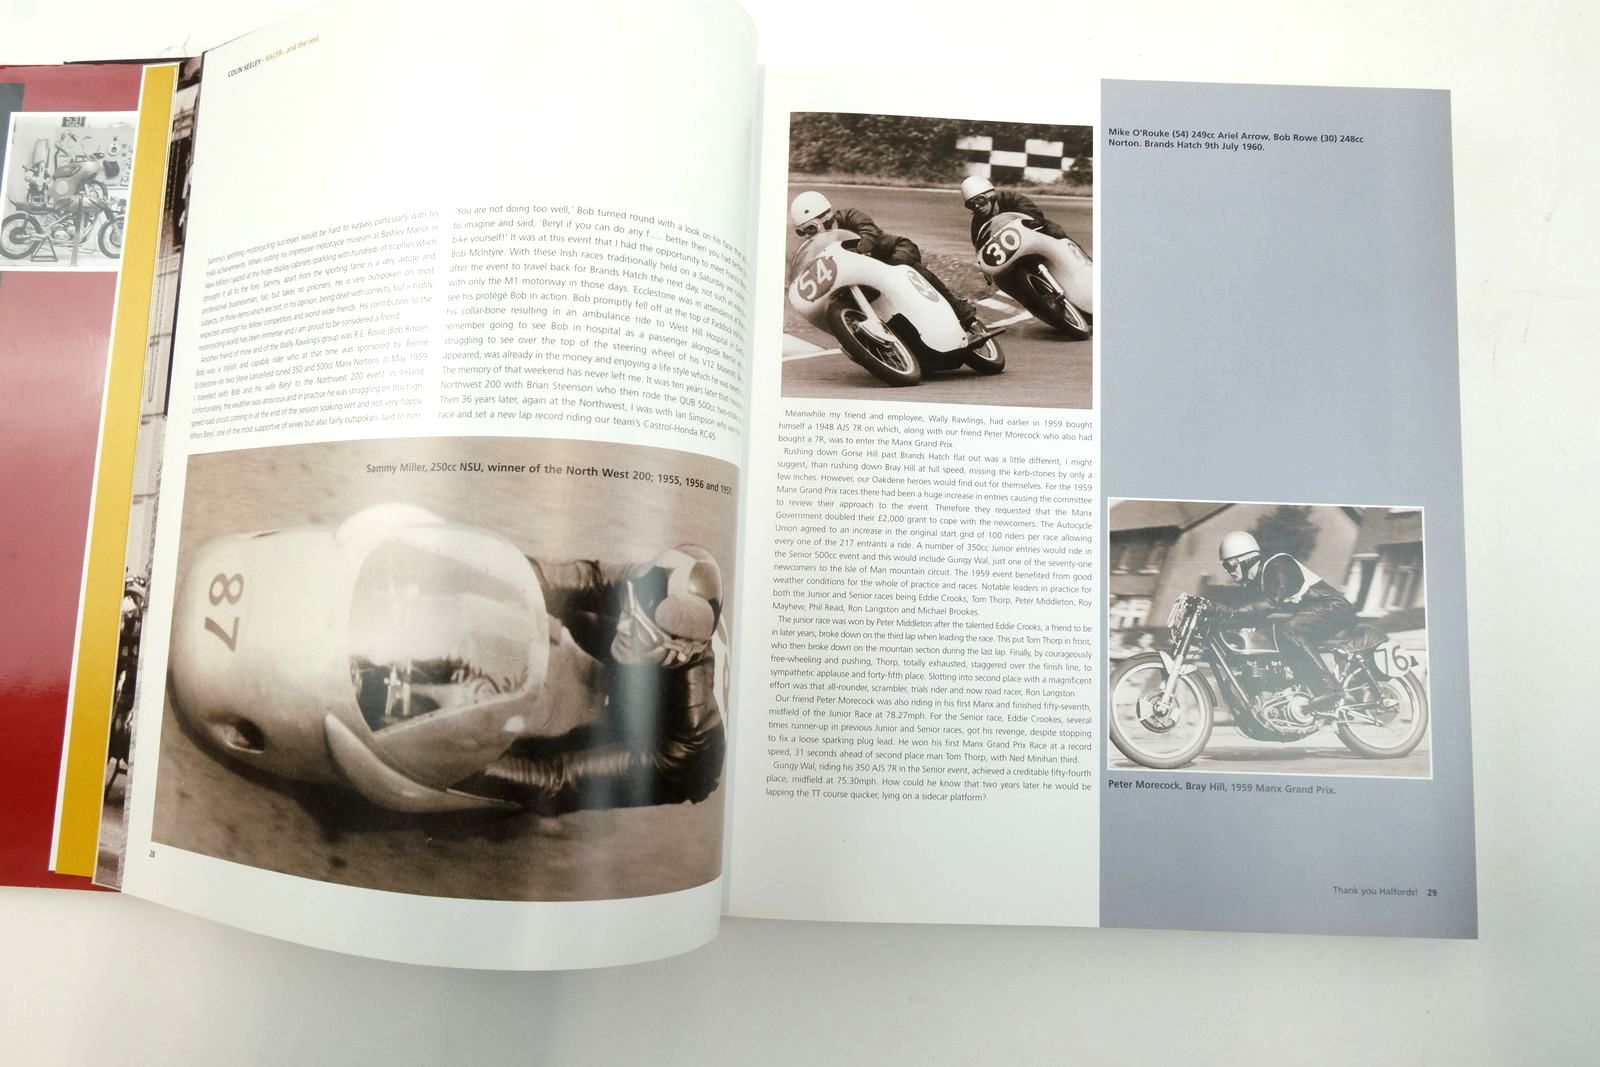 Photo of RACER... AND THE REST written by Seeley, Colin published by Redline Books (STOCK CODE: 2137563)  for sale by Stella & Rose's Books